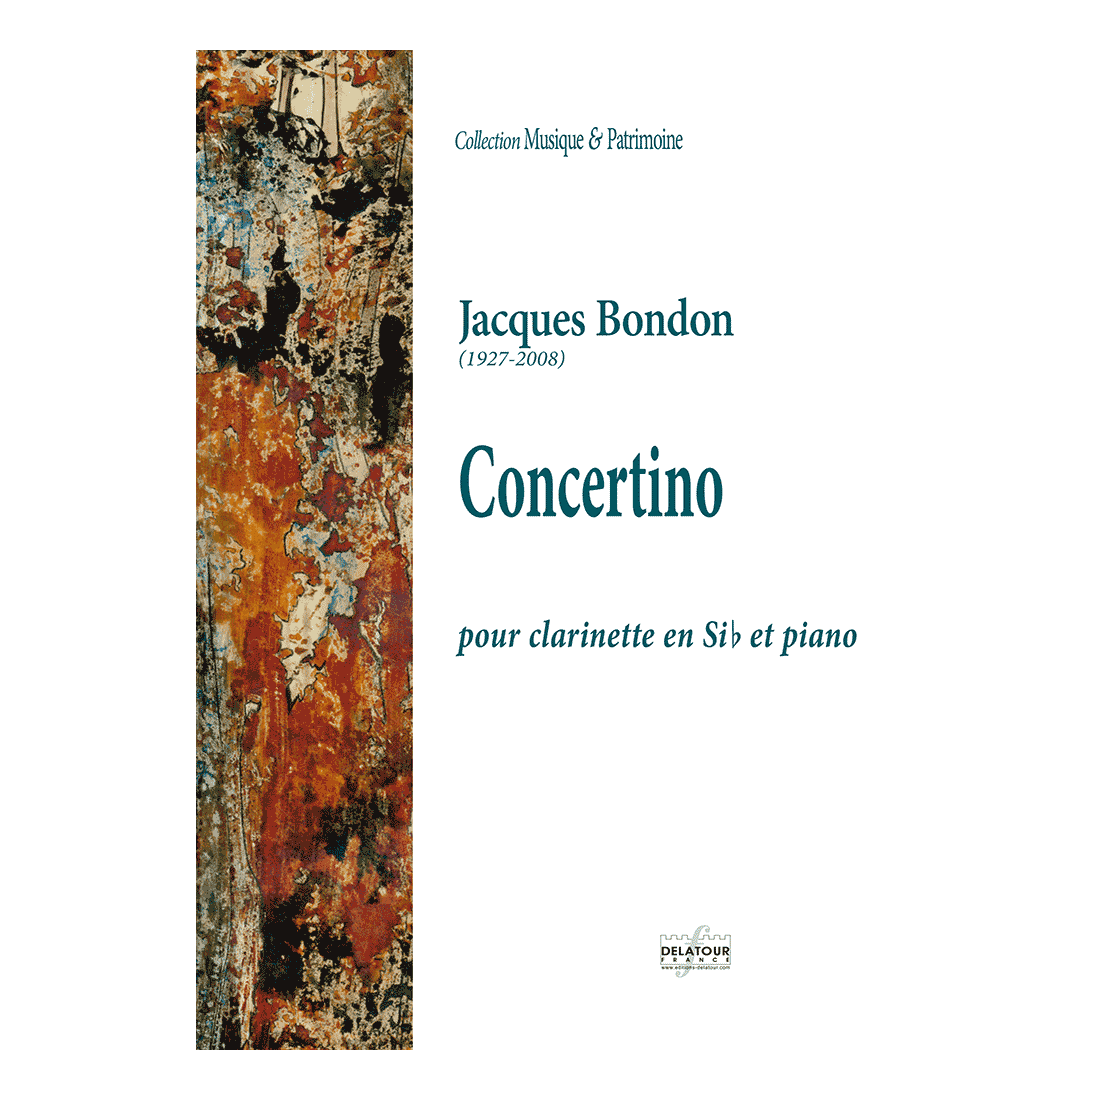 Concertino for clarinet and organ